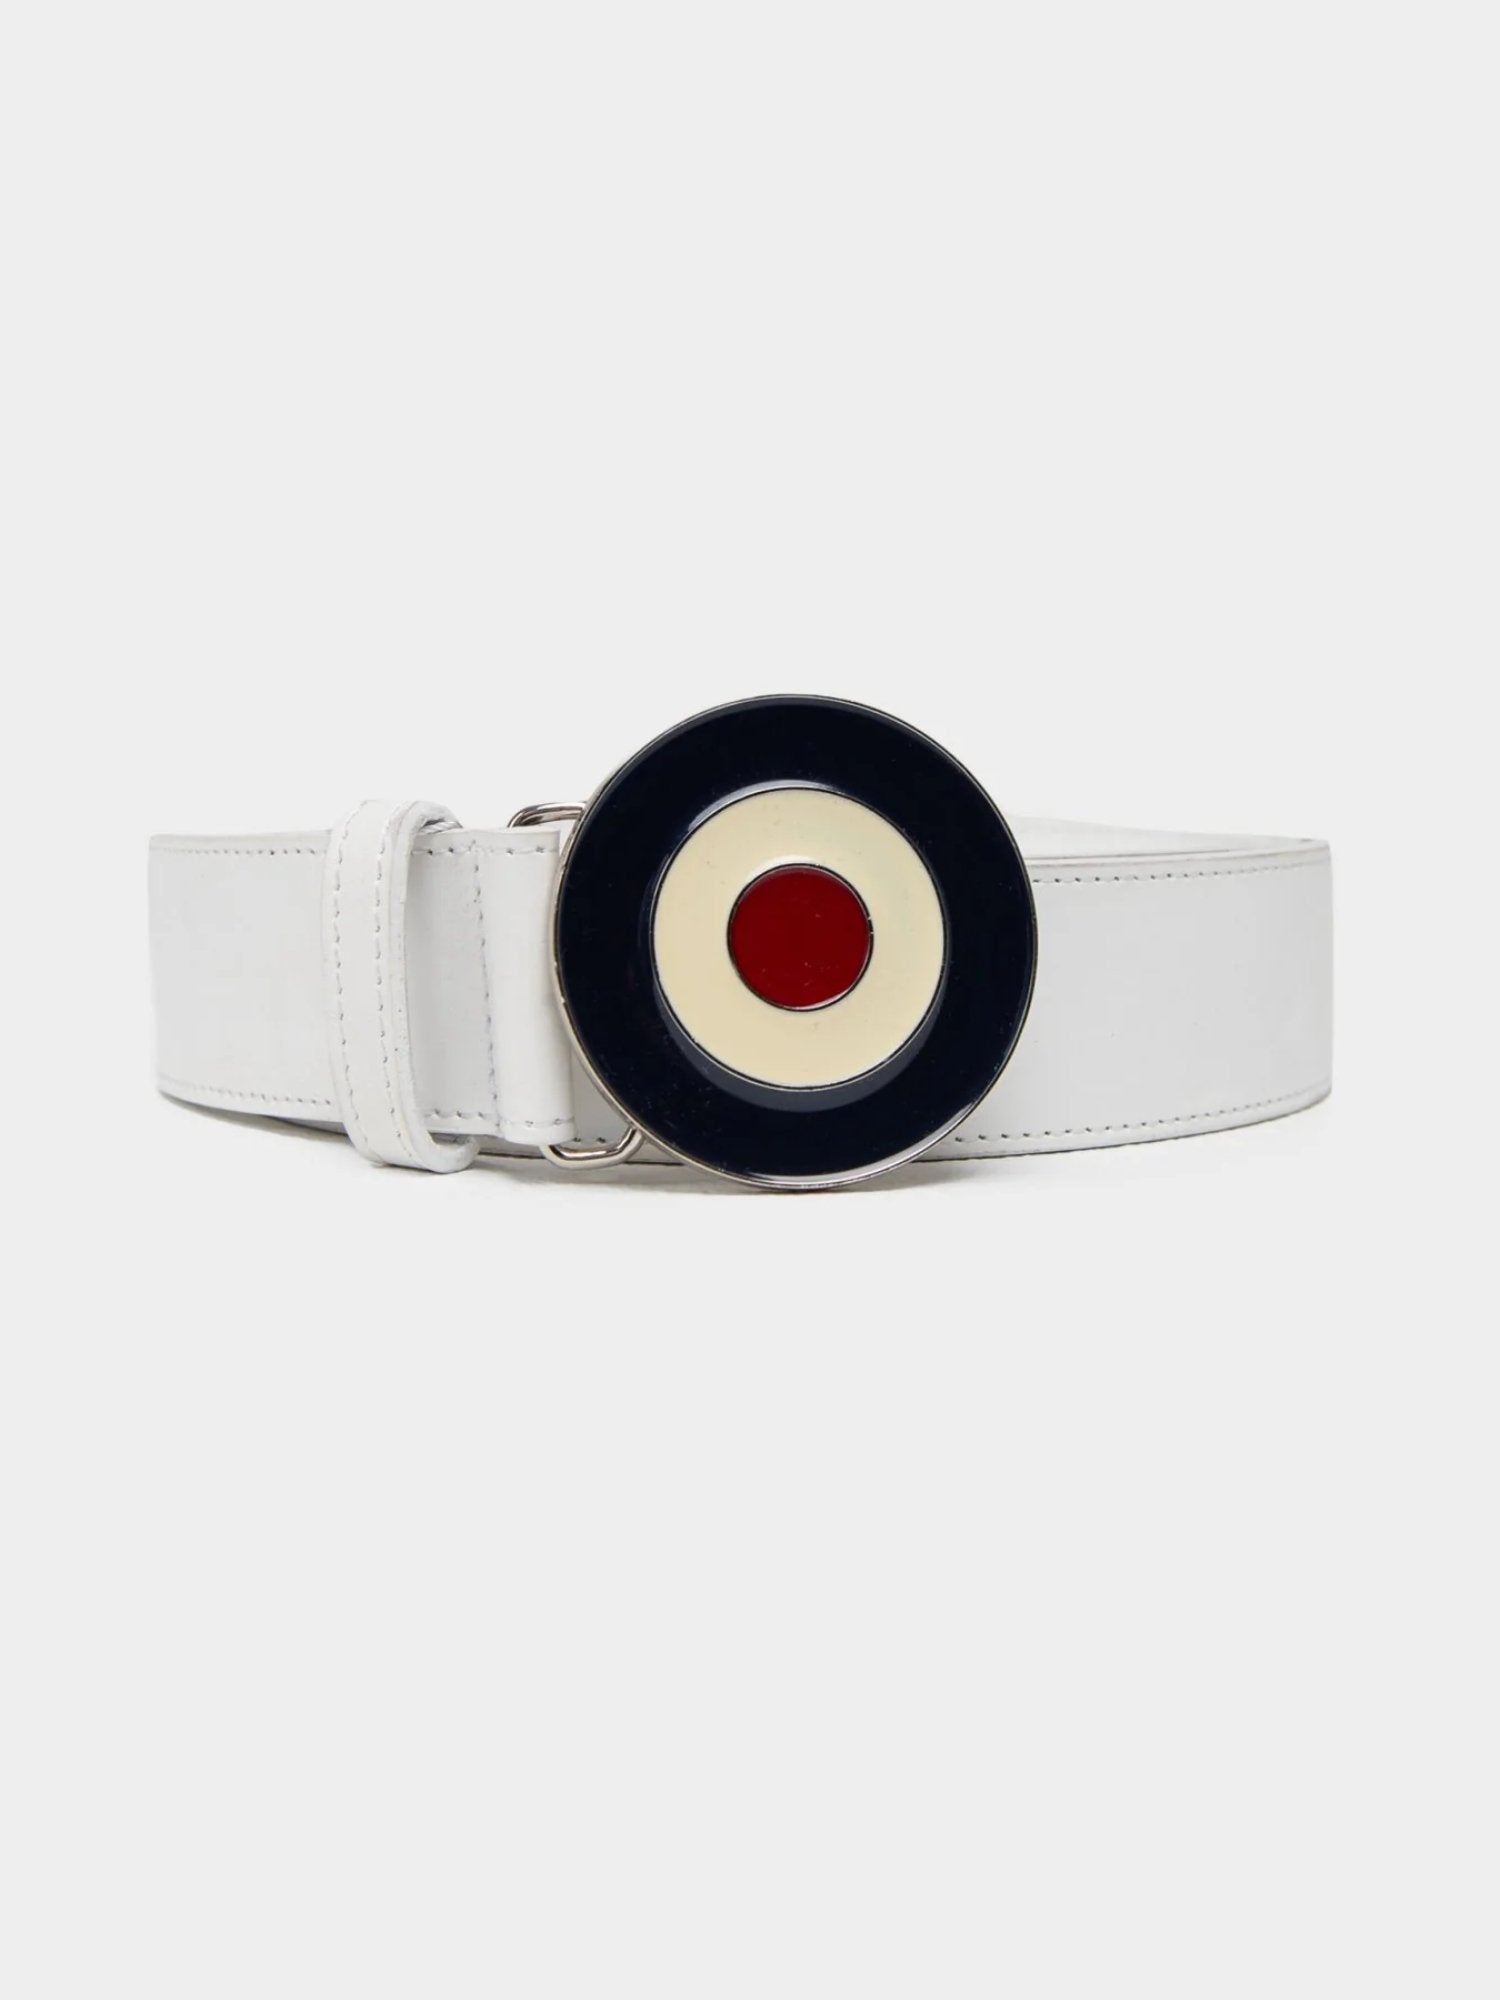 Target Buckle Belt (Leather) - White